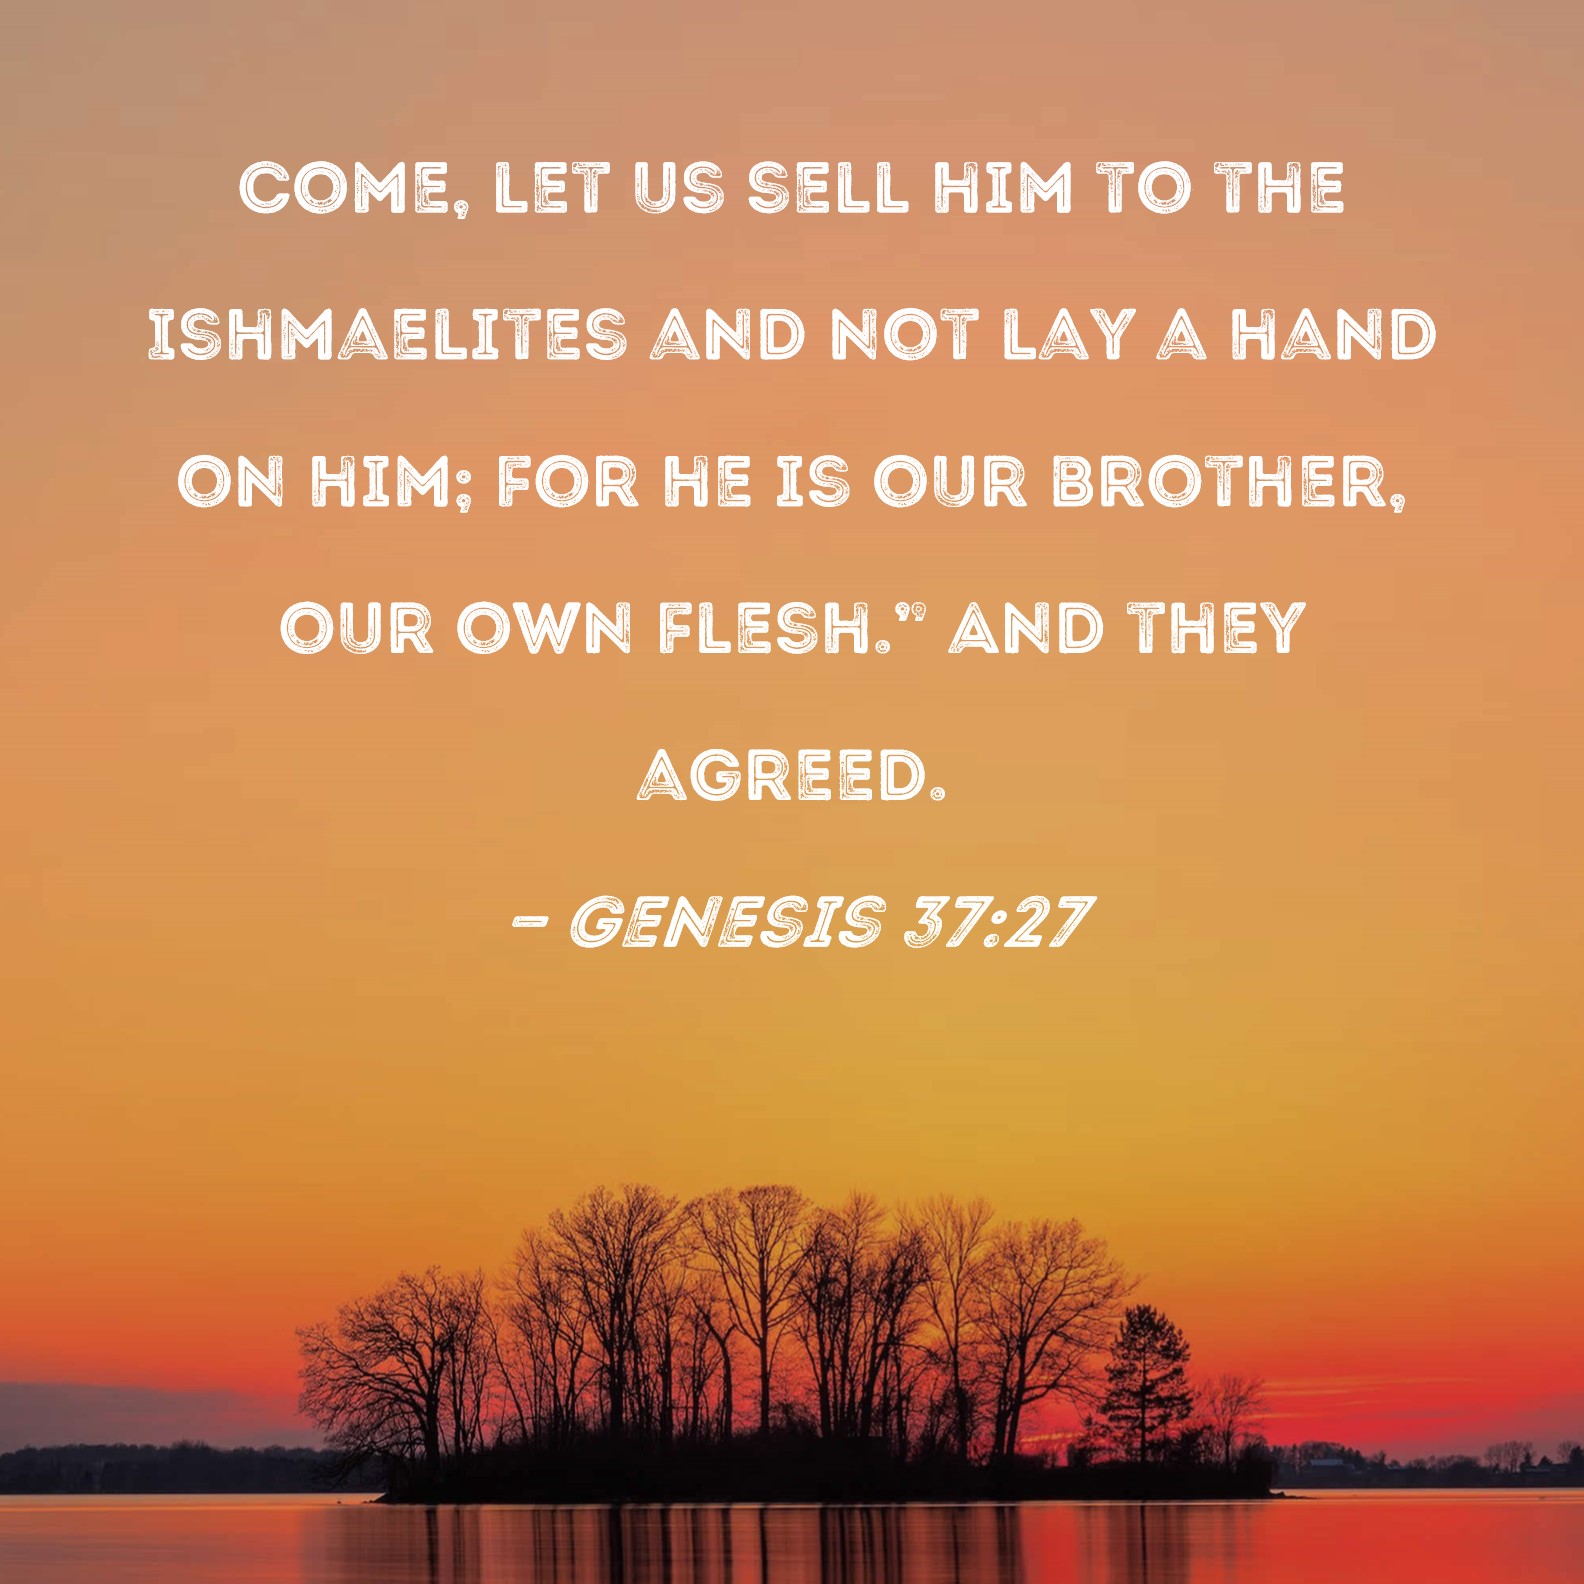 Genesis 37:27 Come, let us sell him to the Ishmaelites and not lay a hand  on him; for he is our brother, our own flesh." And they agreed.